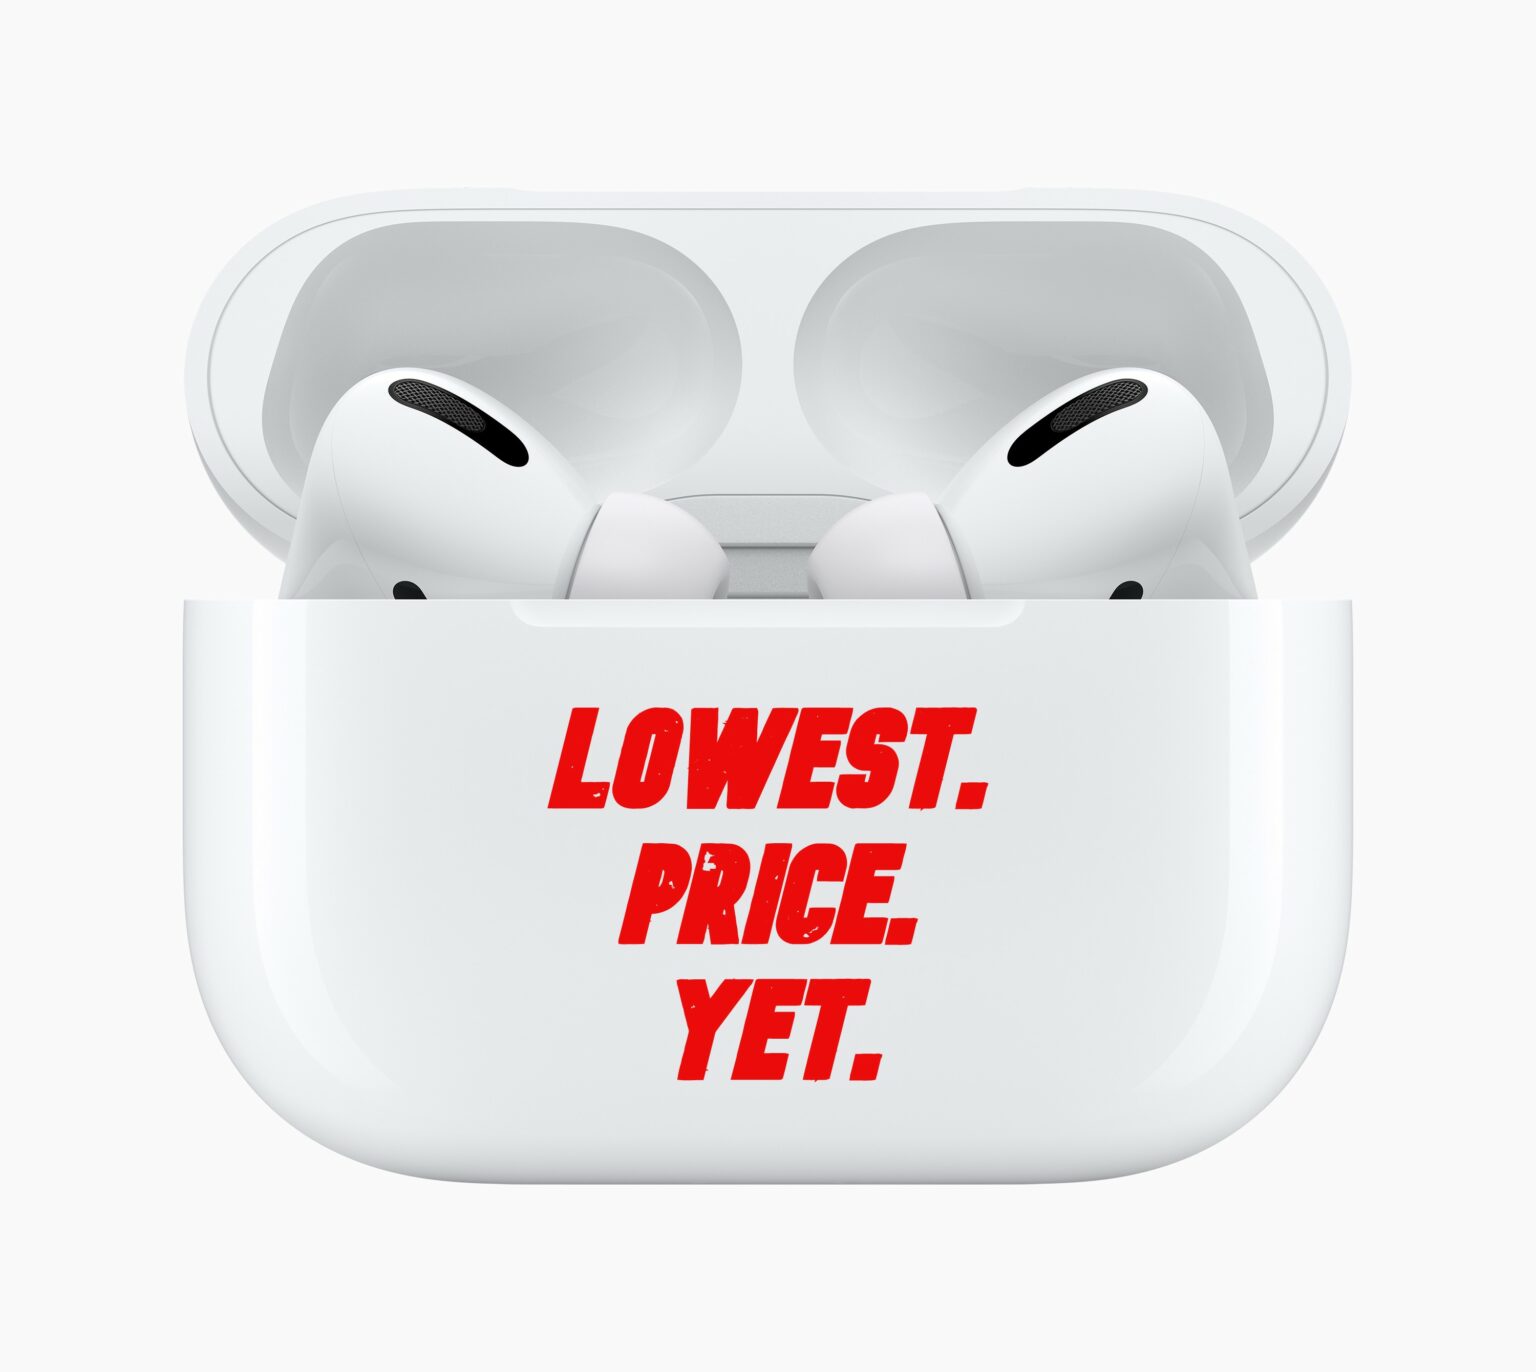 AirPods Pro sale: This is the lowest price yet